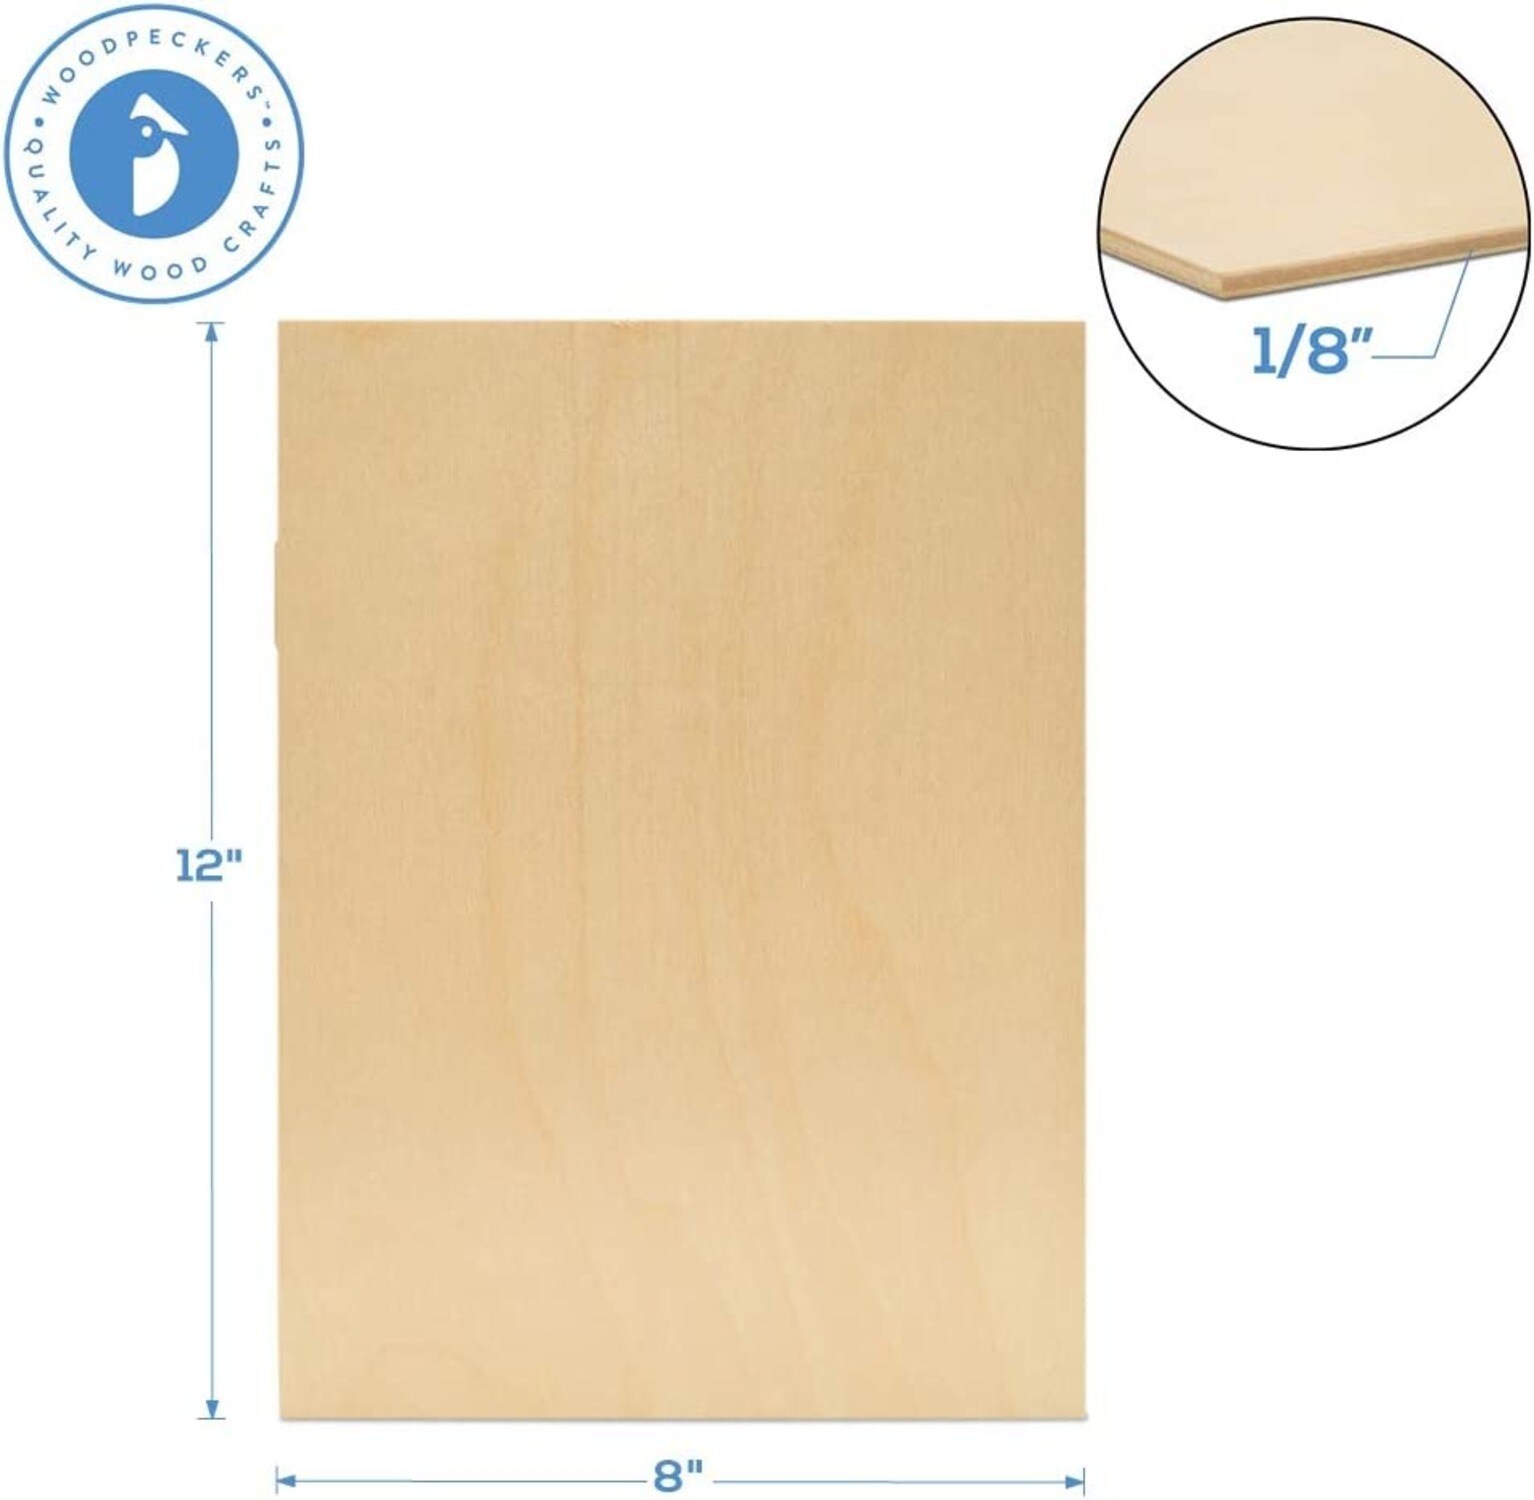 Frylr 12*12*1/8 Thickness Premium Baltic Birch Plywood, 3mm Unfinished Wood A/A Grade (Box of 8) Perfect for Wood Crafts, Las 3-8